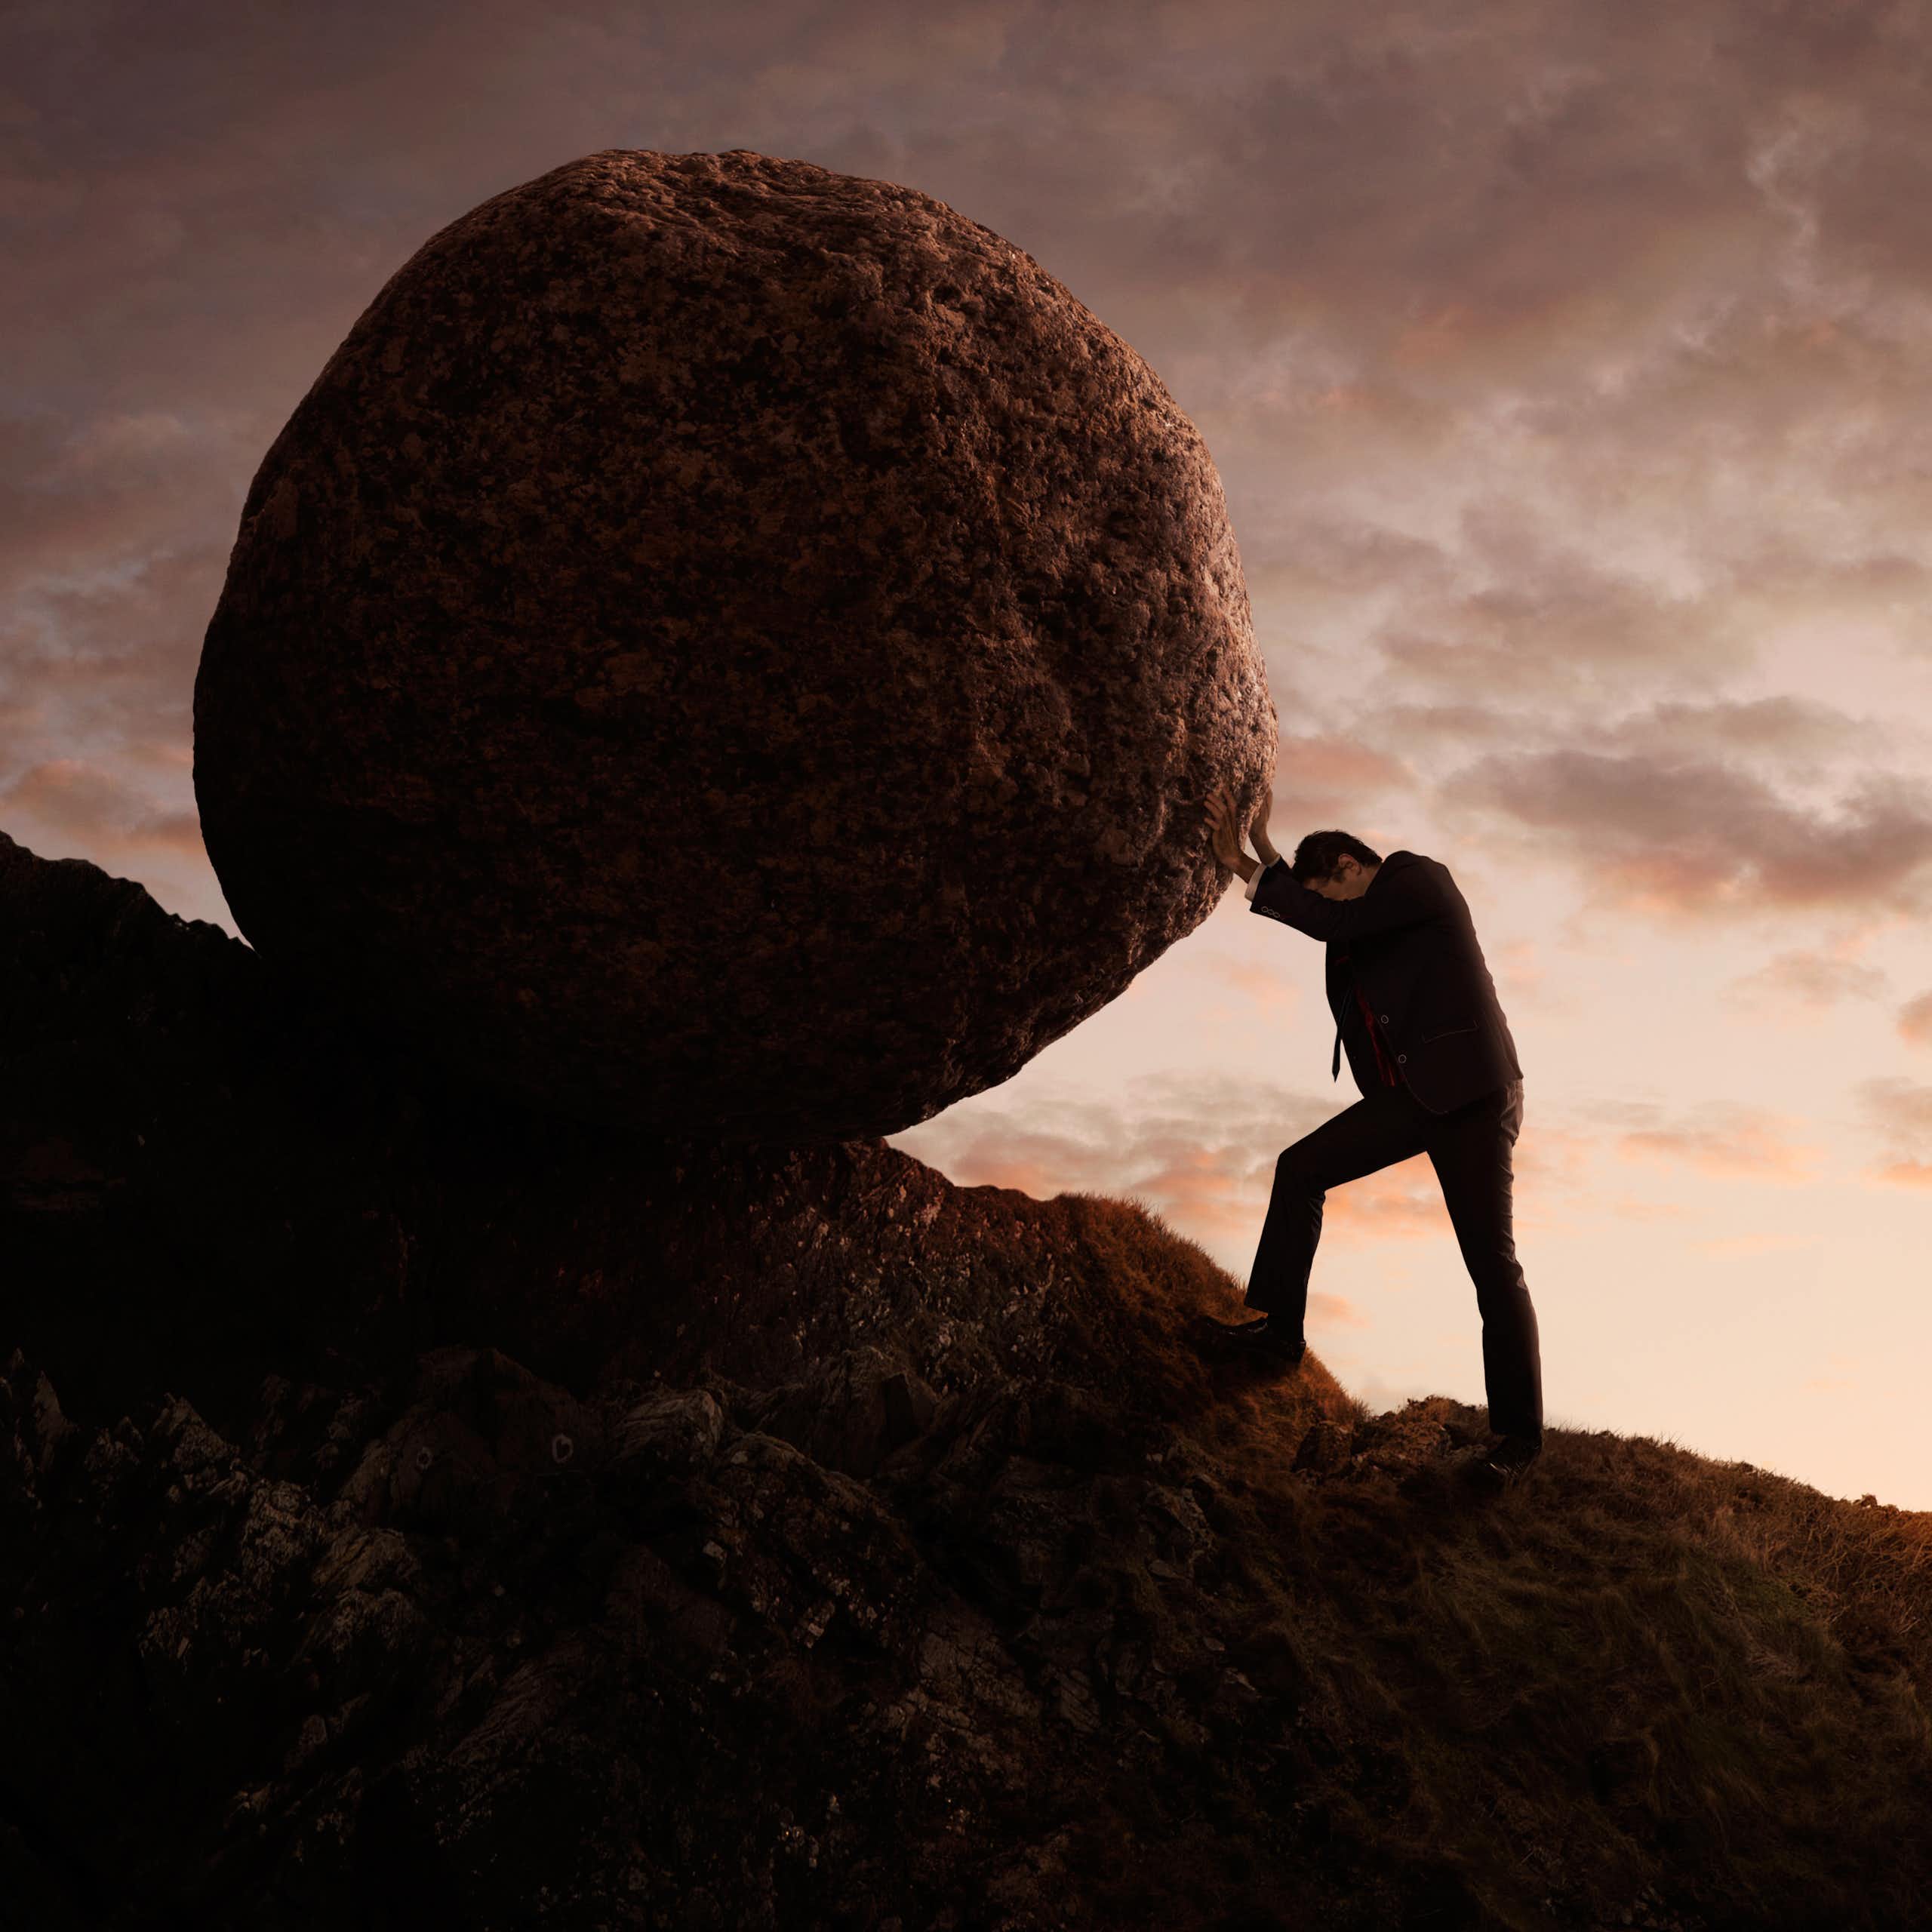 A man in a business suit pushing a boulder up a mountain